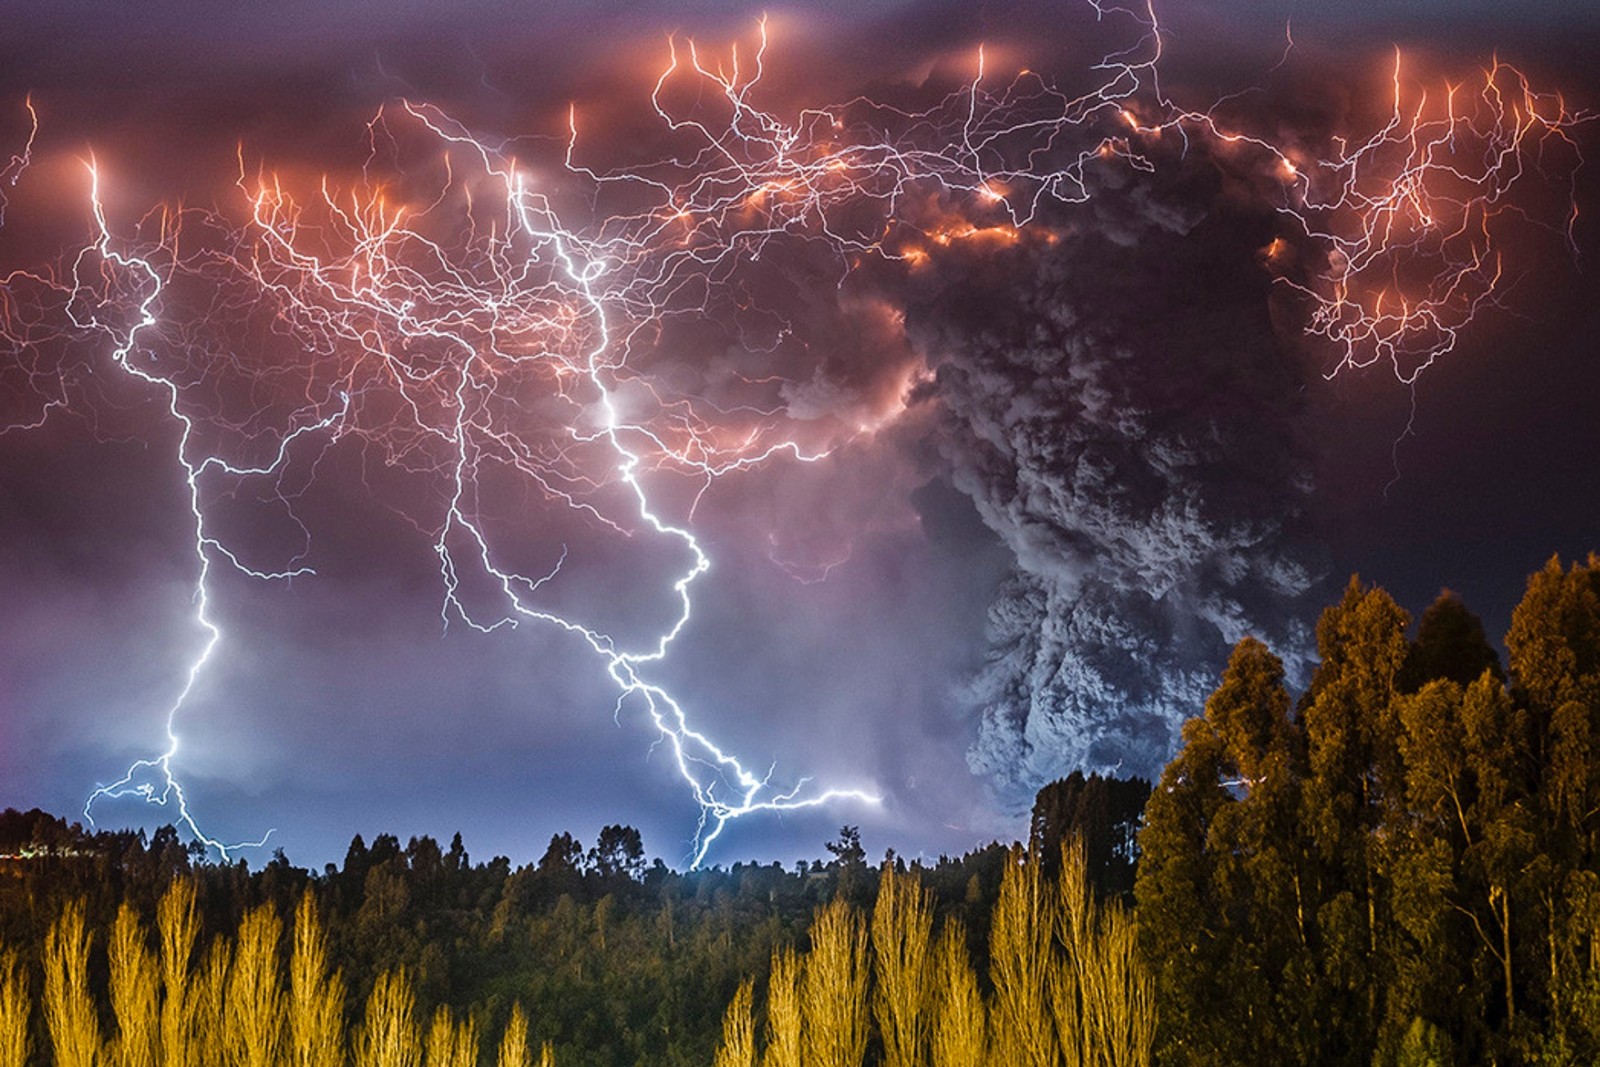 night, volcano, nature, Chile, lightning, forest, storm, landscape, eruption, photography Gallery HD Wallpaper